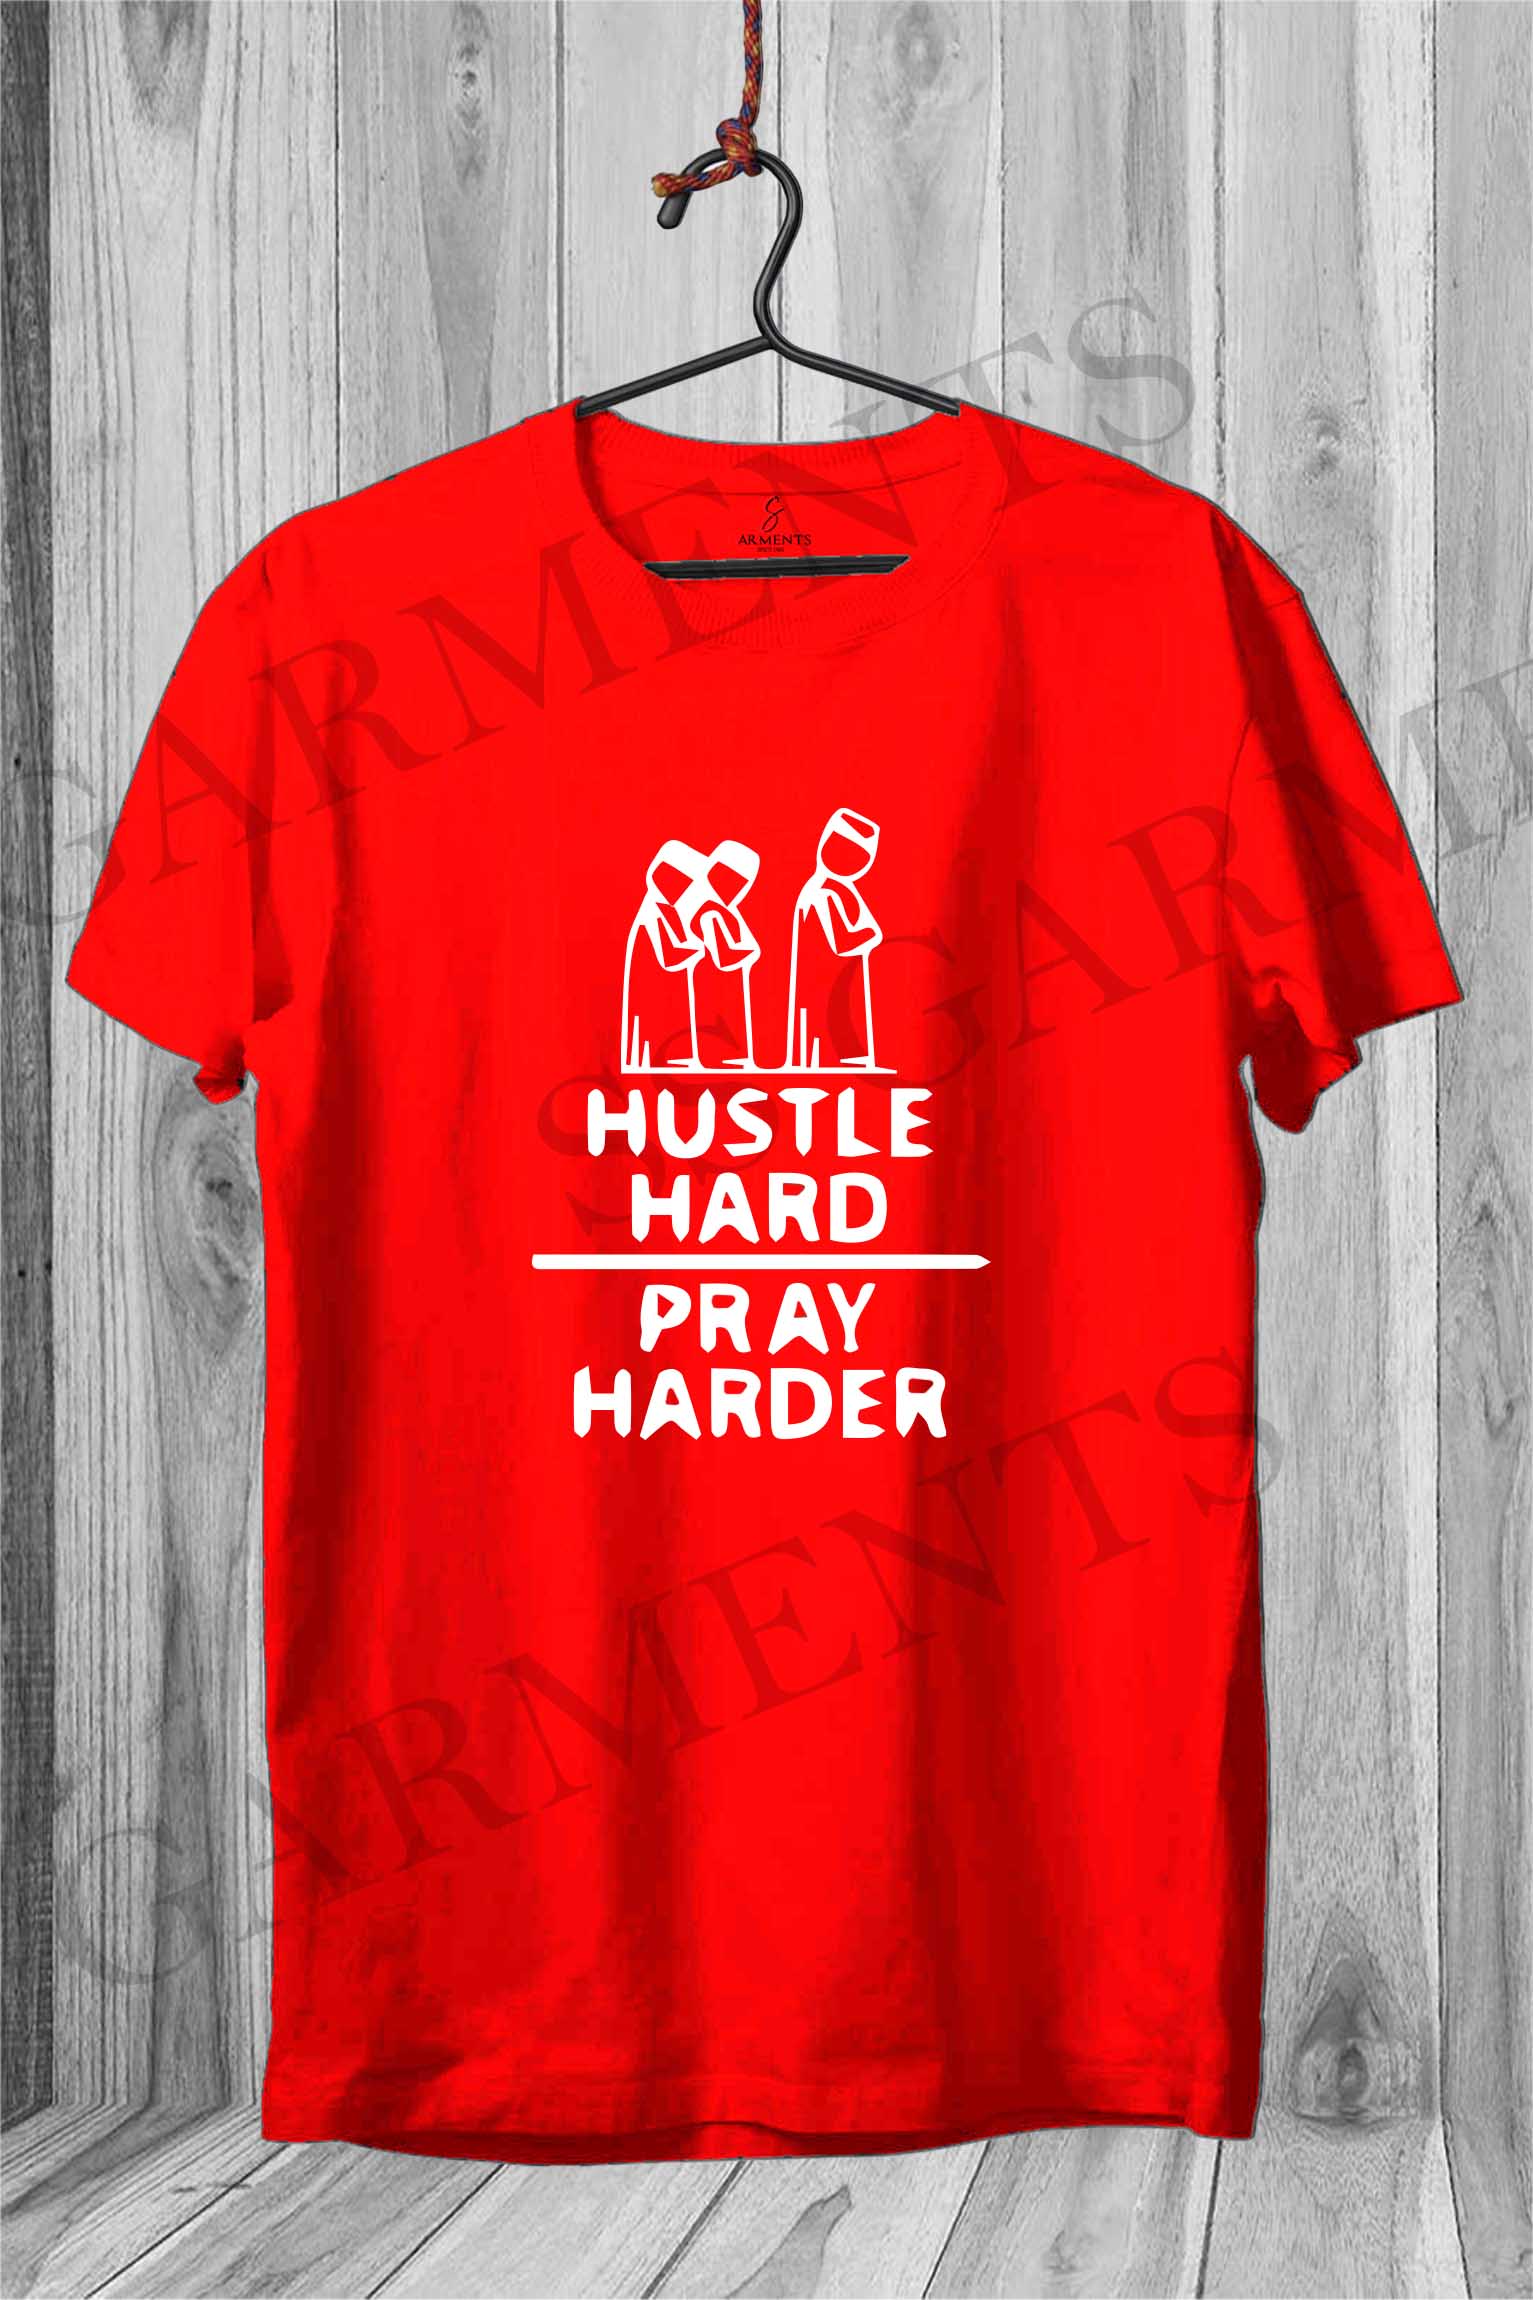 Hustle and Pray Harder t shirts for male